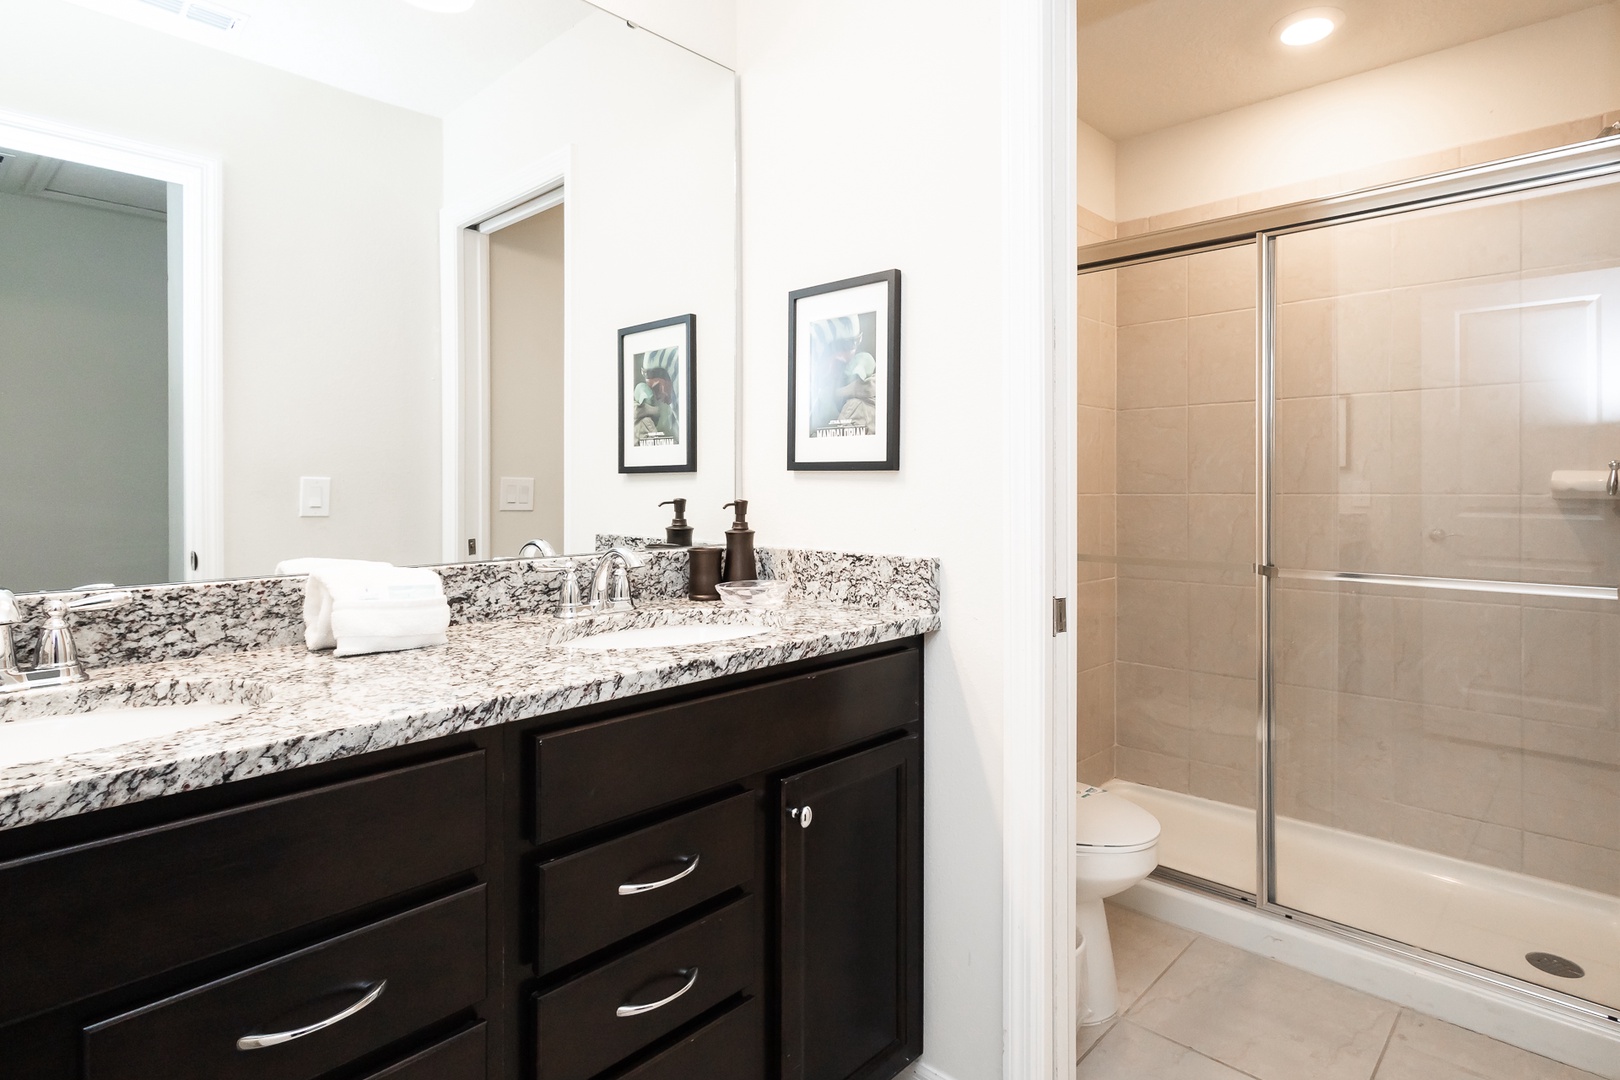 This 2nd floor hall bathroom offers a double vanity & glass shower